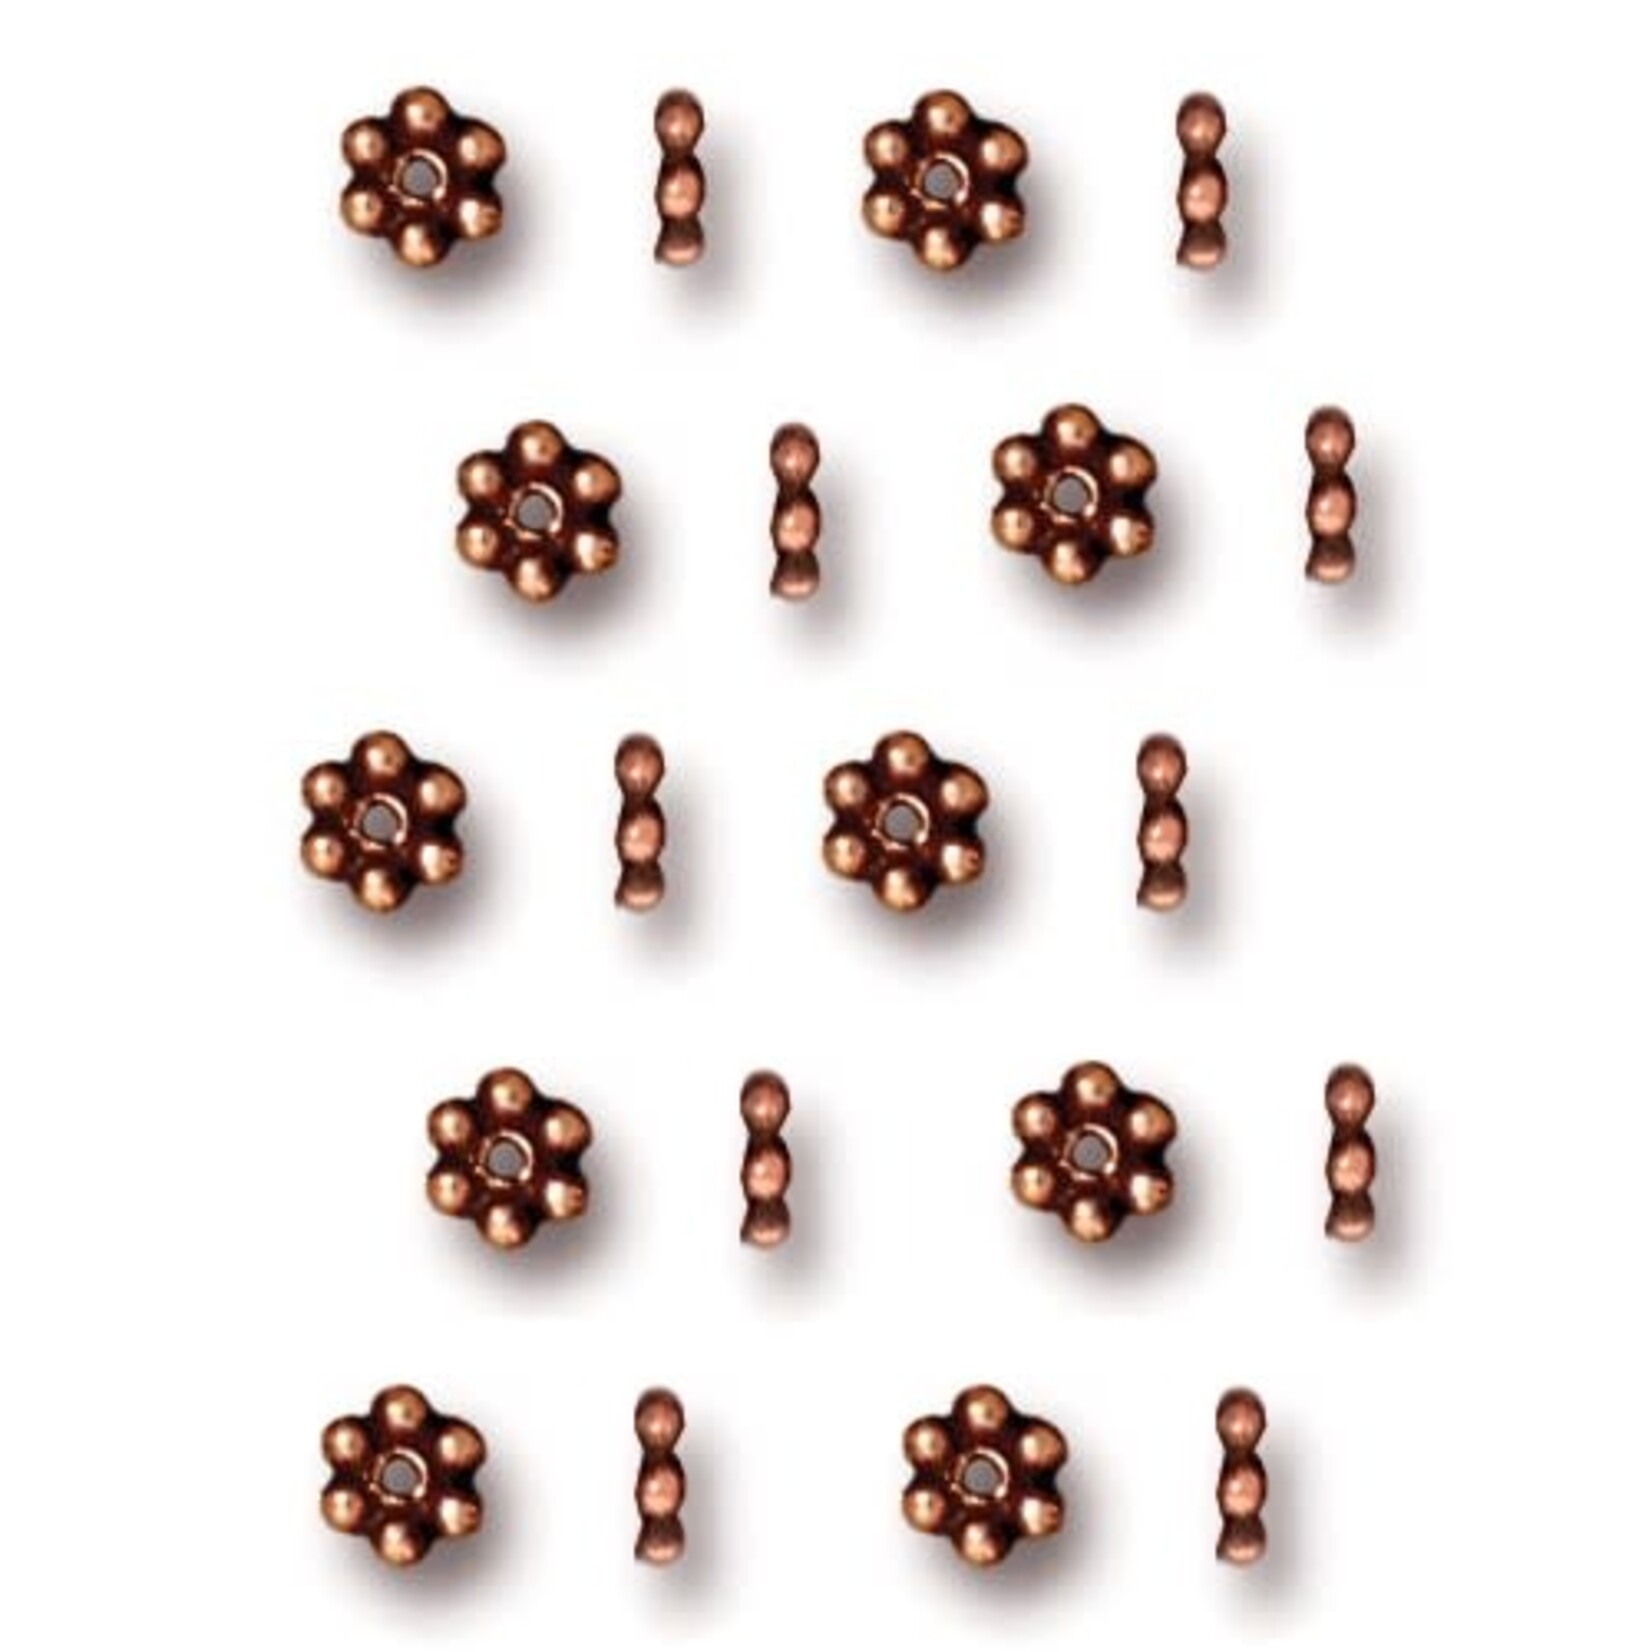 Tierracast Antique Copper Plated 3mm Beaded Daisy Spacer Bead - 20 pieces